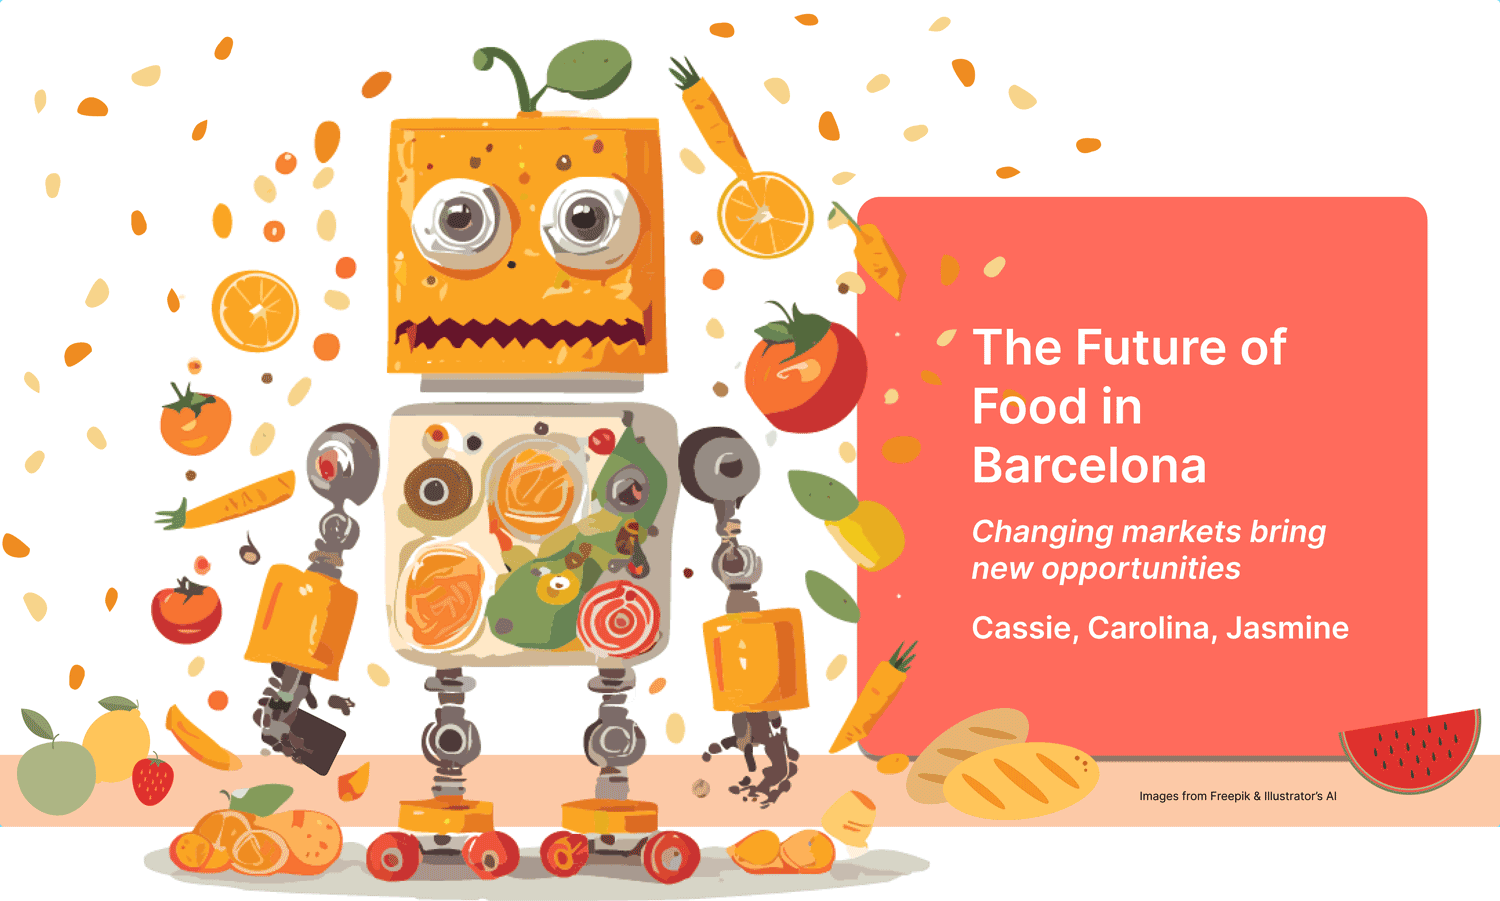 The Future of Food in Barcelona